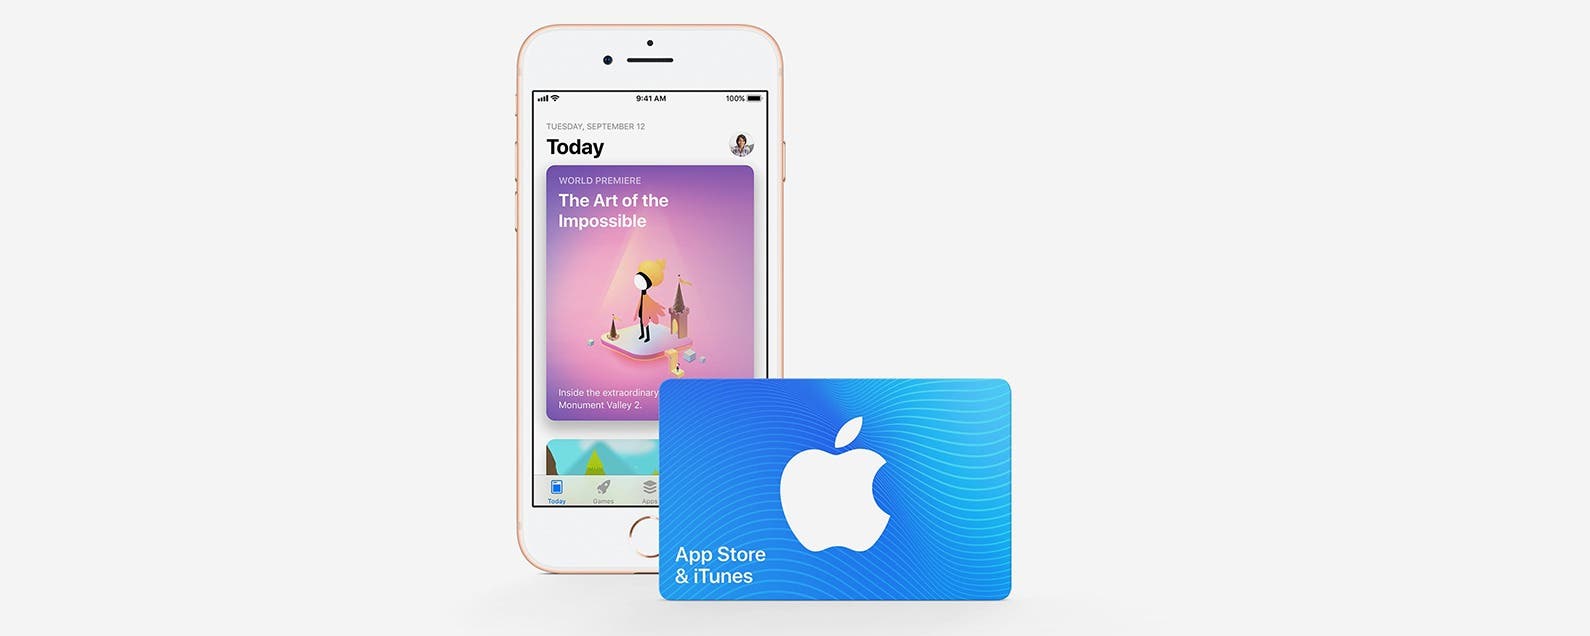 How To Redeem An Itunes Card To A Child Or Family Sharing Account